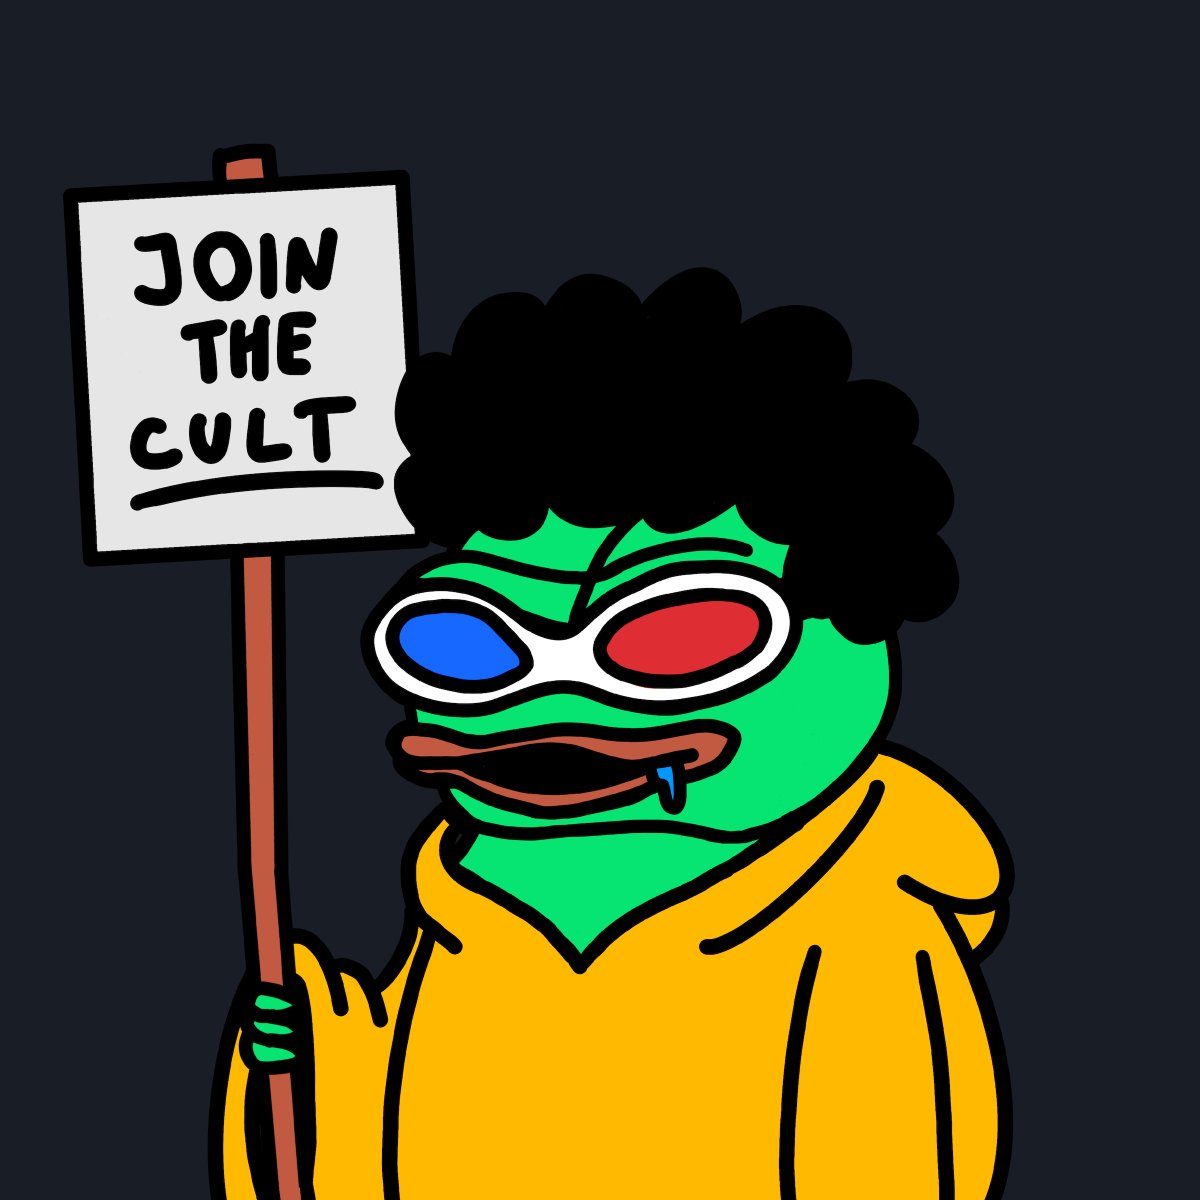 JOIN THE CULT

$DOUG
#PINEOWL
#JoinTheCult